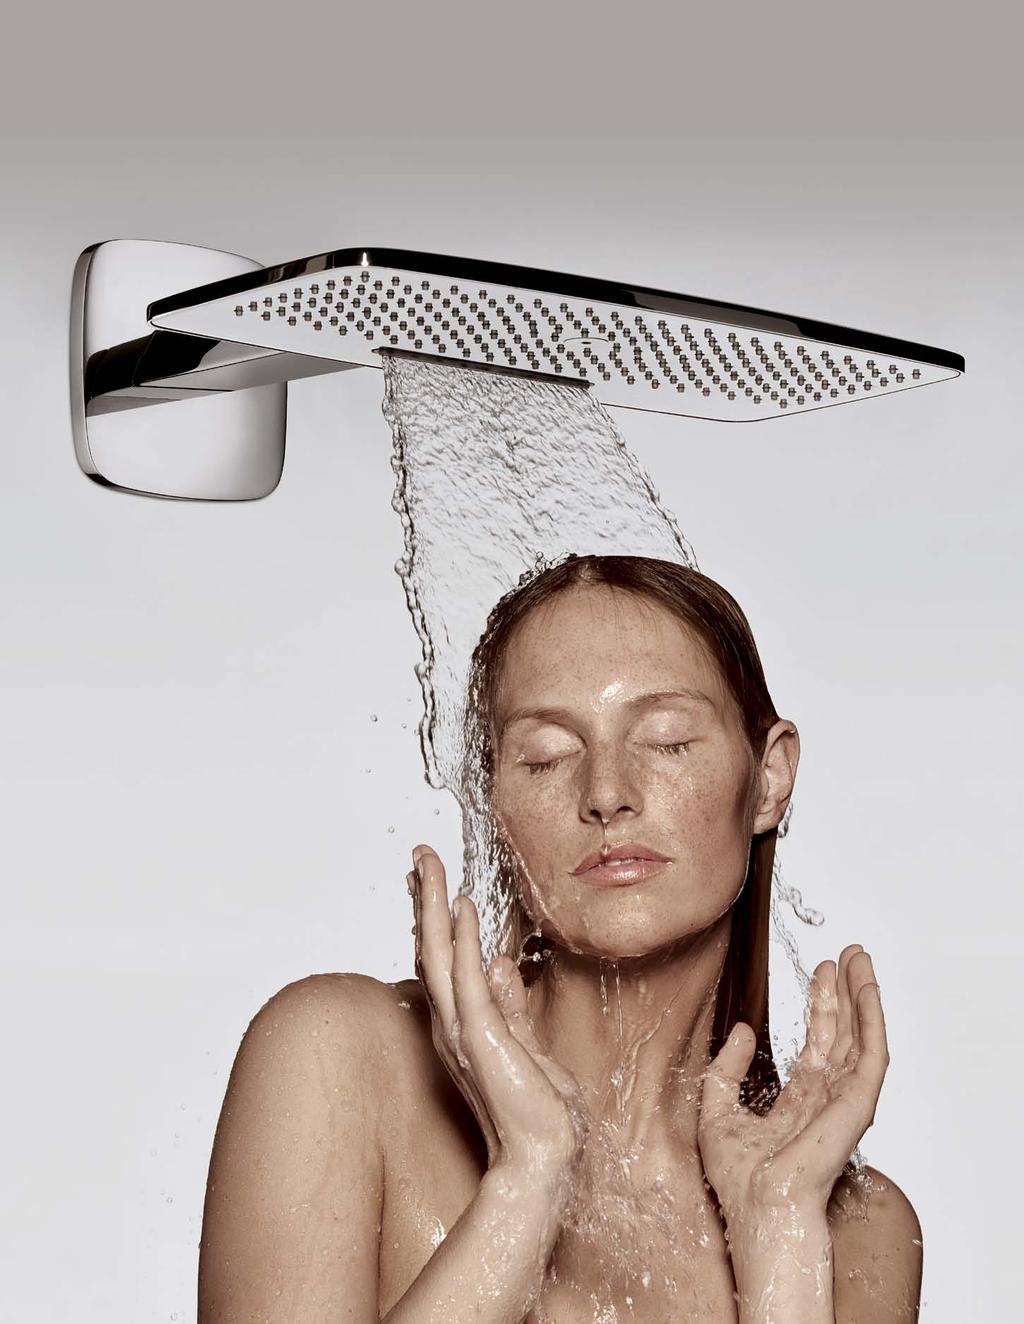 Raindance E 420 AIR 2-Jet Showerhead. The rectangular shape of the Raindance E 420 AIR was designed with the contour of the human body in mind particularly the width of the shoulders.